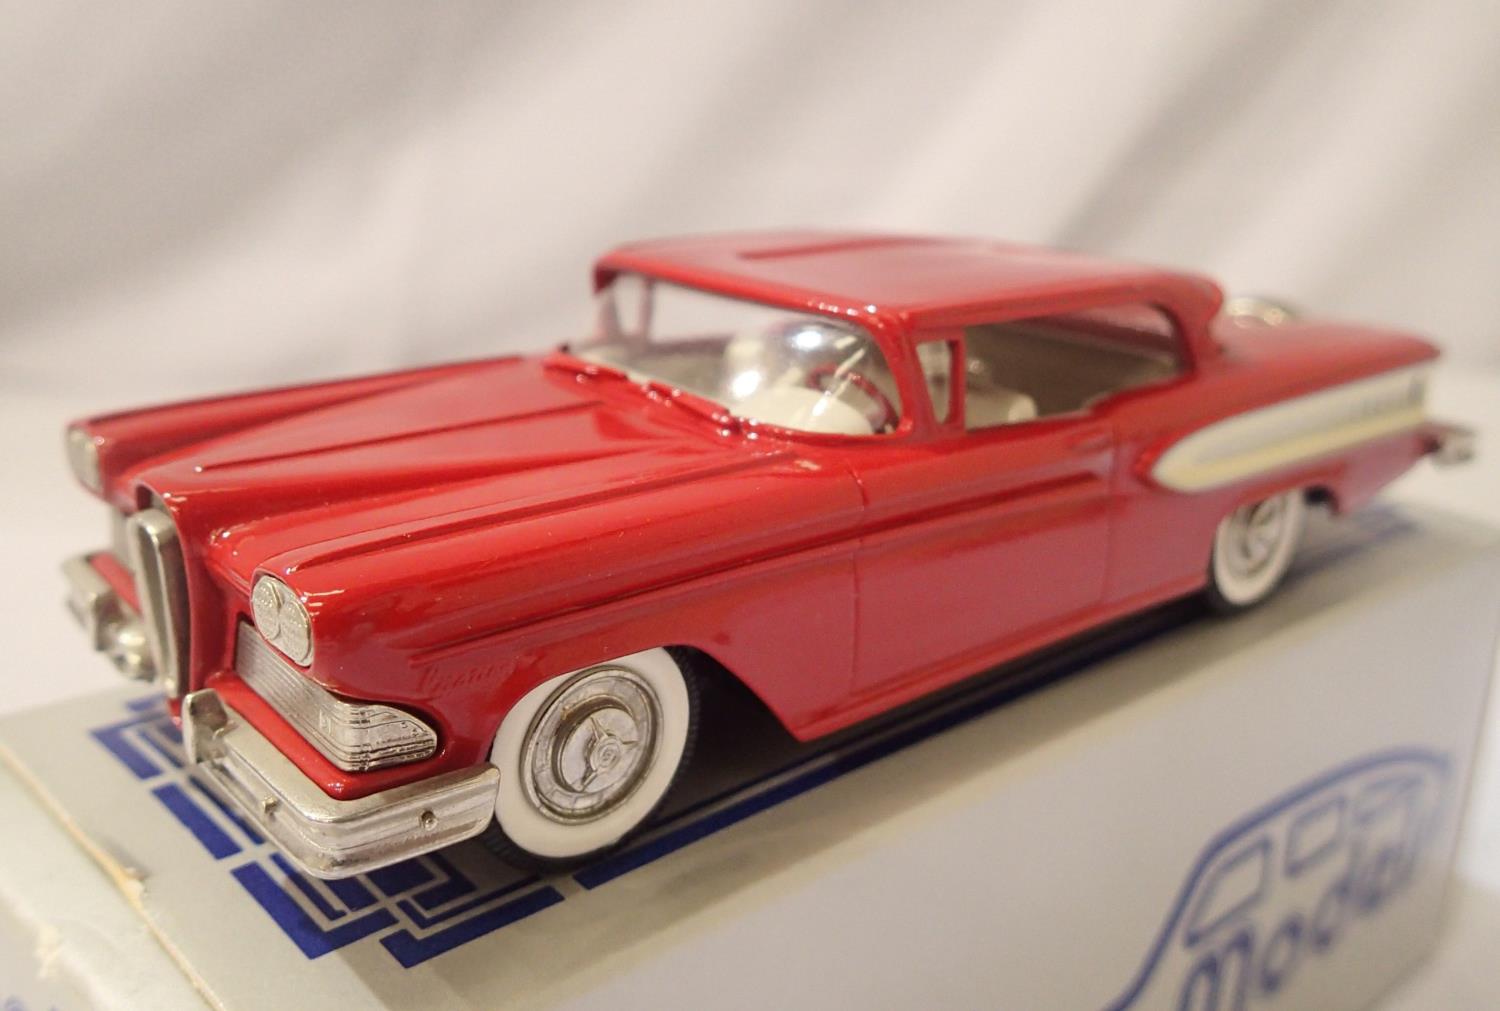 Brooklin models 1/43 scale diecast 1958 Edsel Citation Collectors Club third members model in very